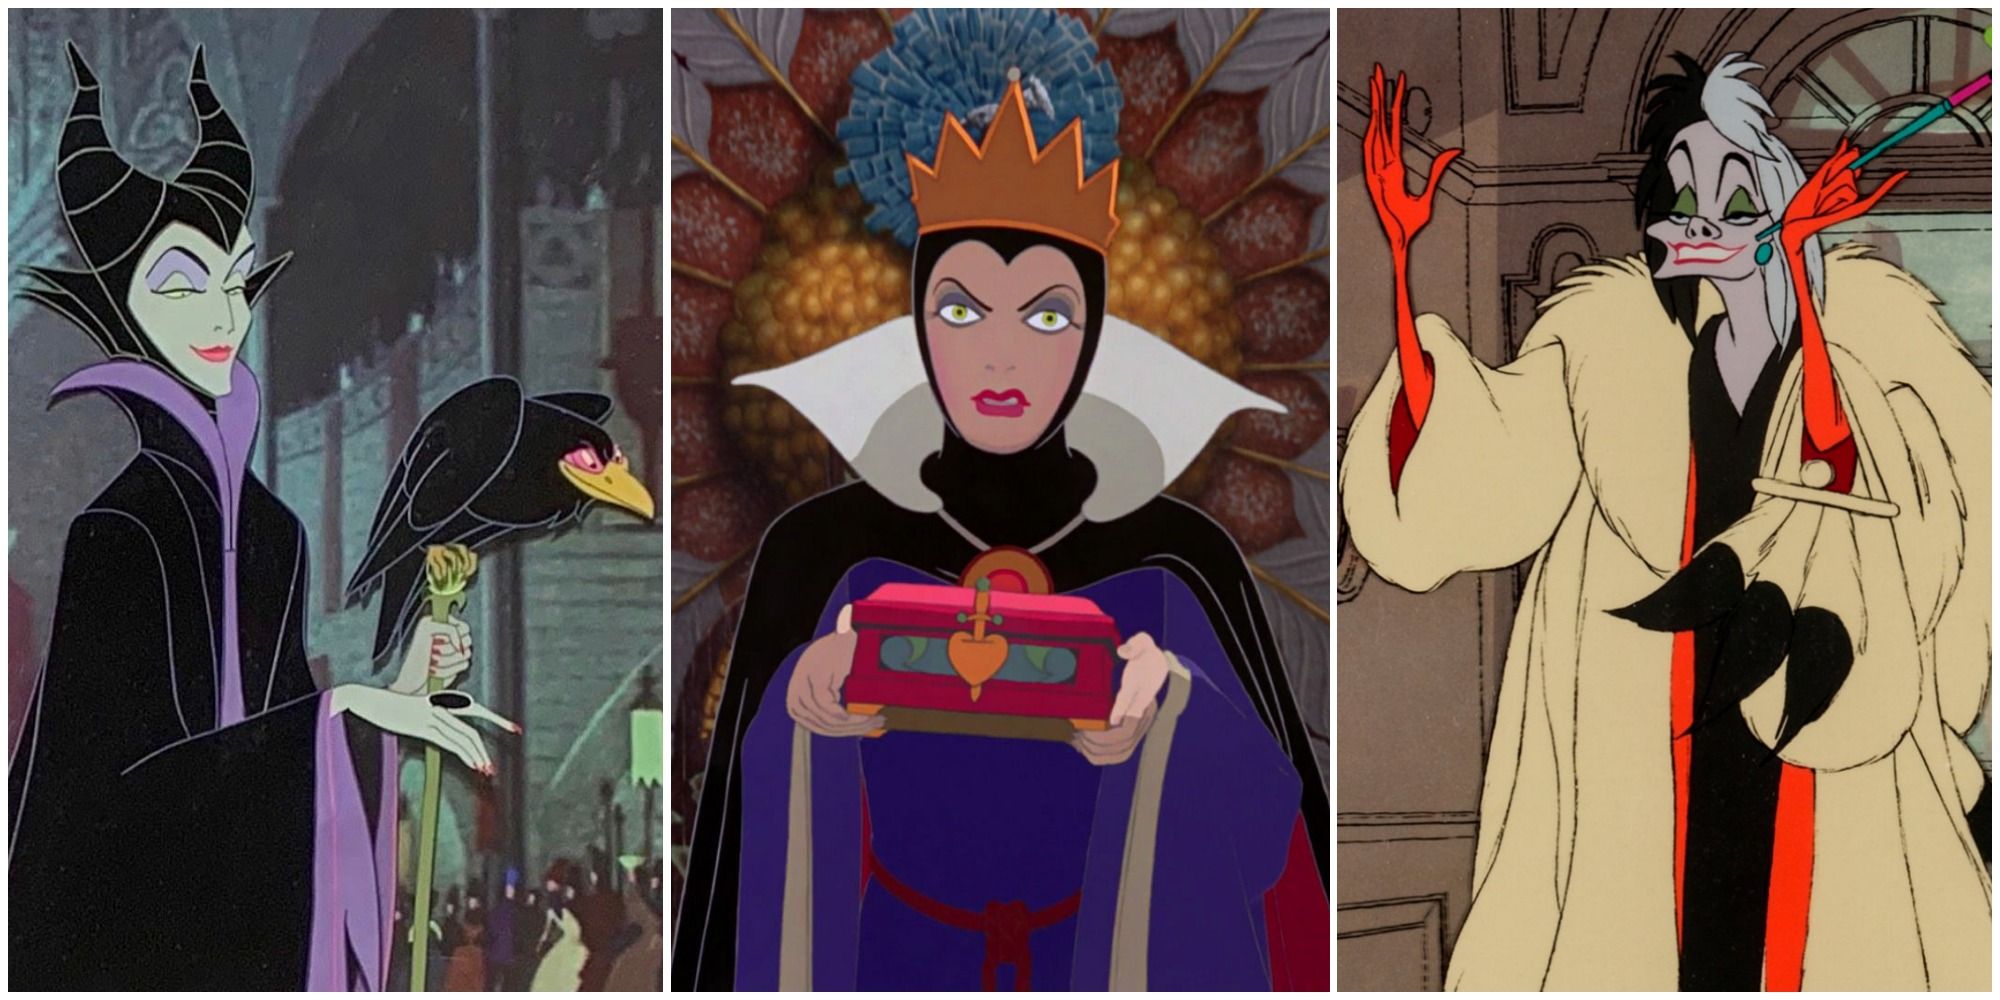 Ranking The Disney Villains By Style